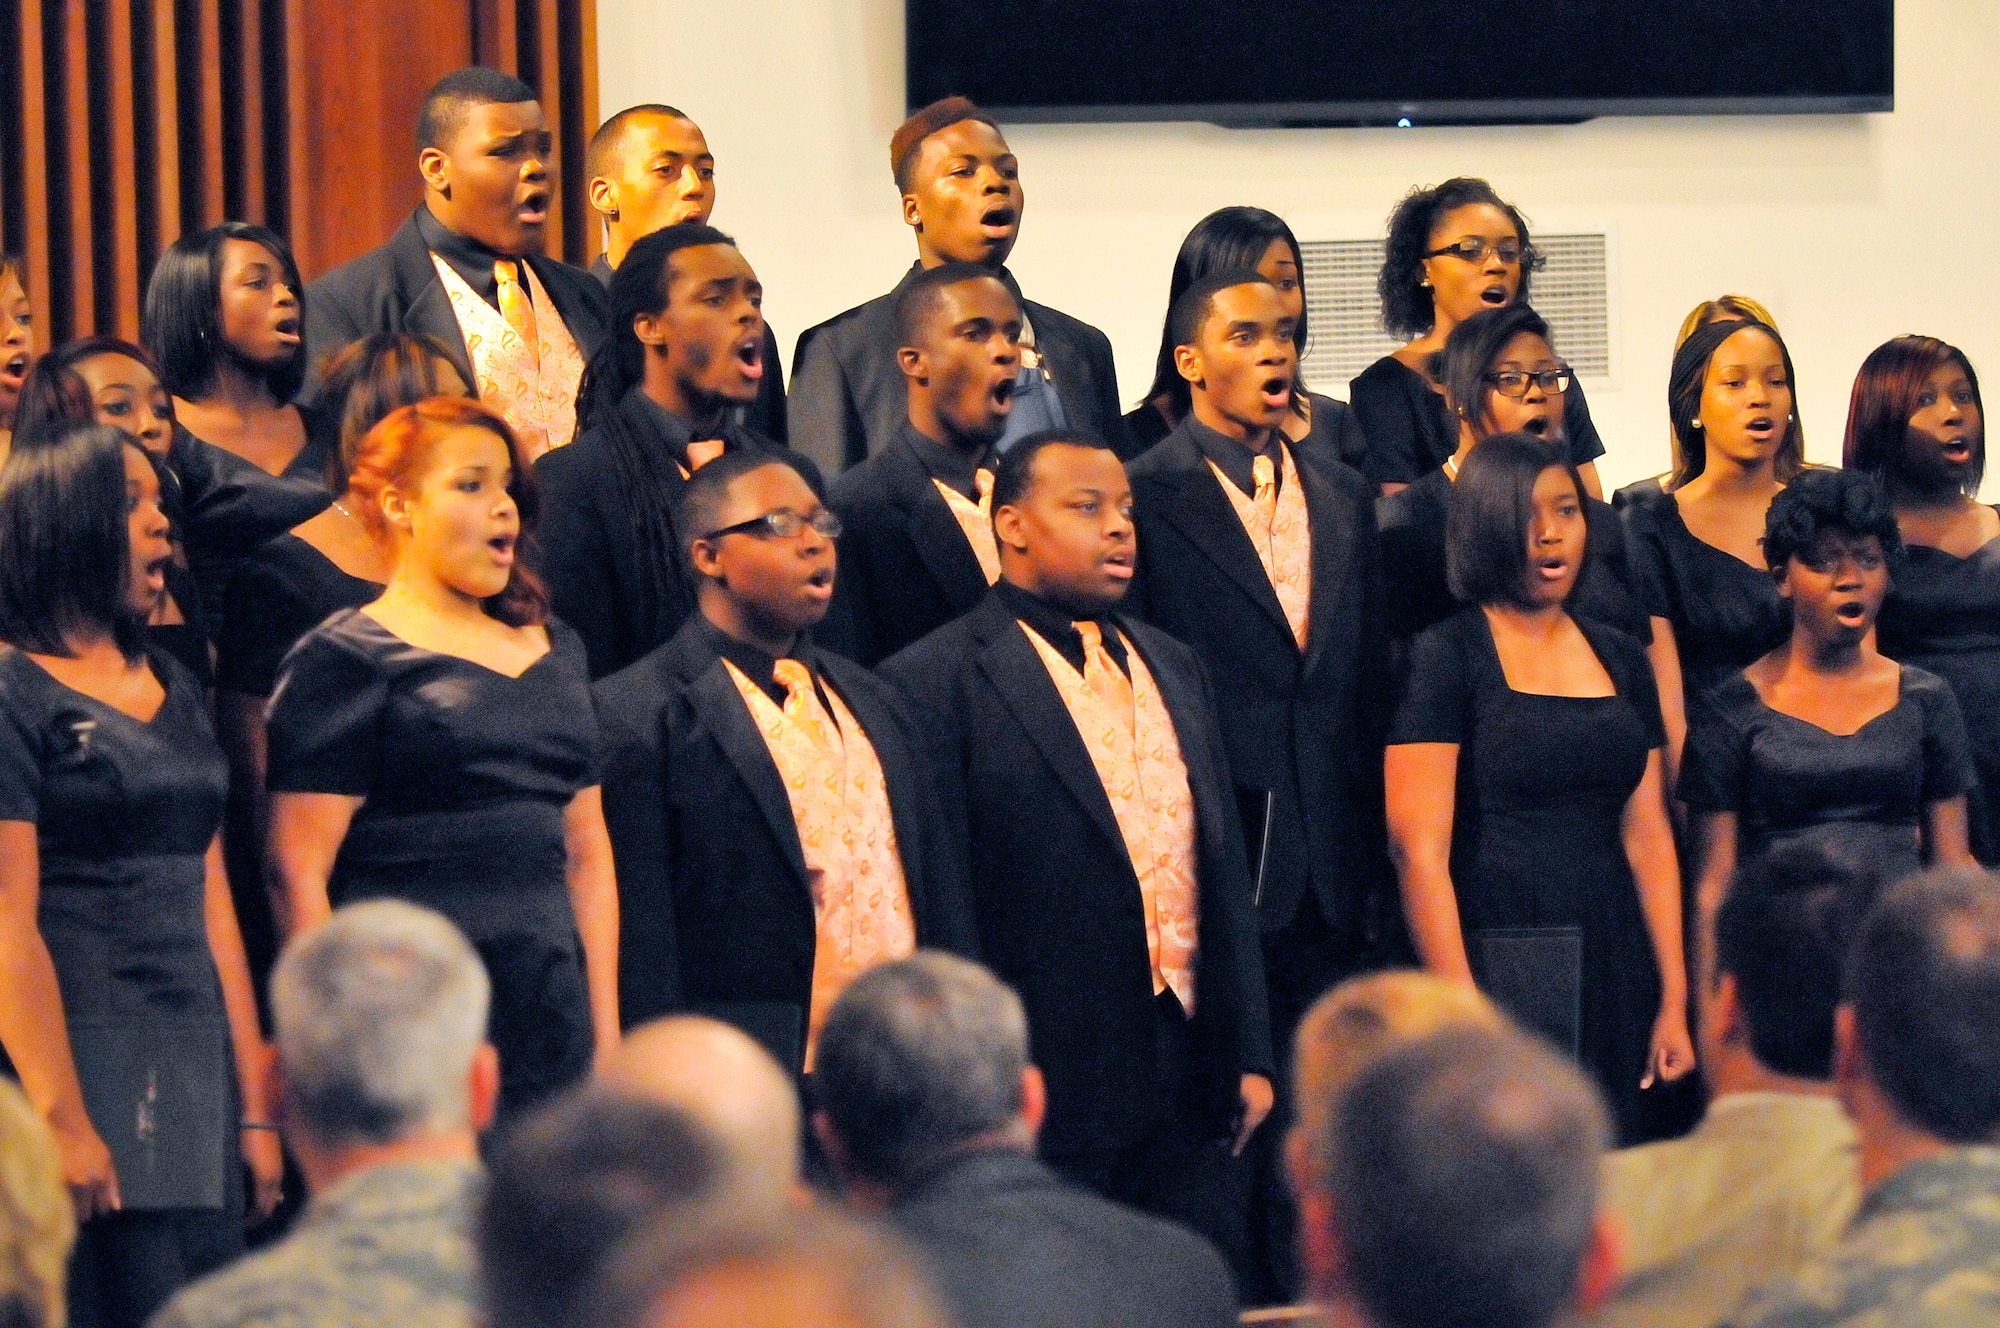 The Central High School Chorus sing "Soon Ah Will Be Done" during the Dr. Martin Luther King, Jr. commemorative service, "Celebrating Diversity in the Legacy of Dr. King", Jan. 17 at Robins Chapel. (U. S. Air Force photo/Sue Sapp)